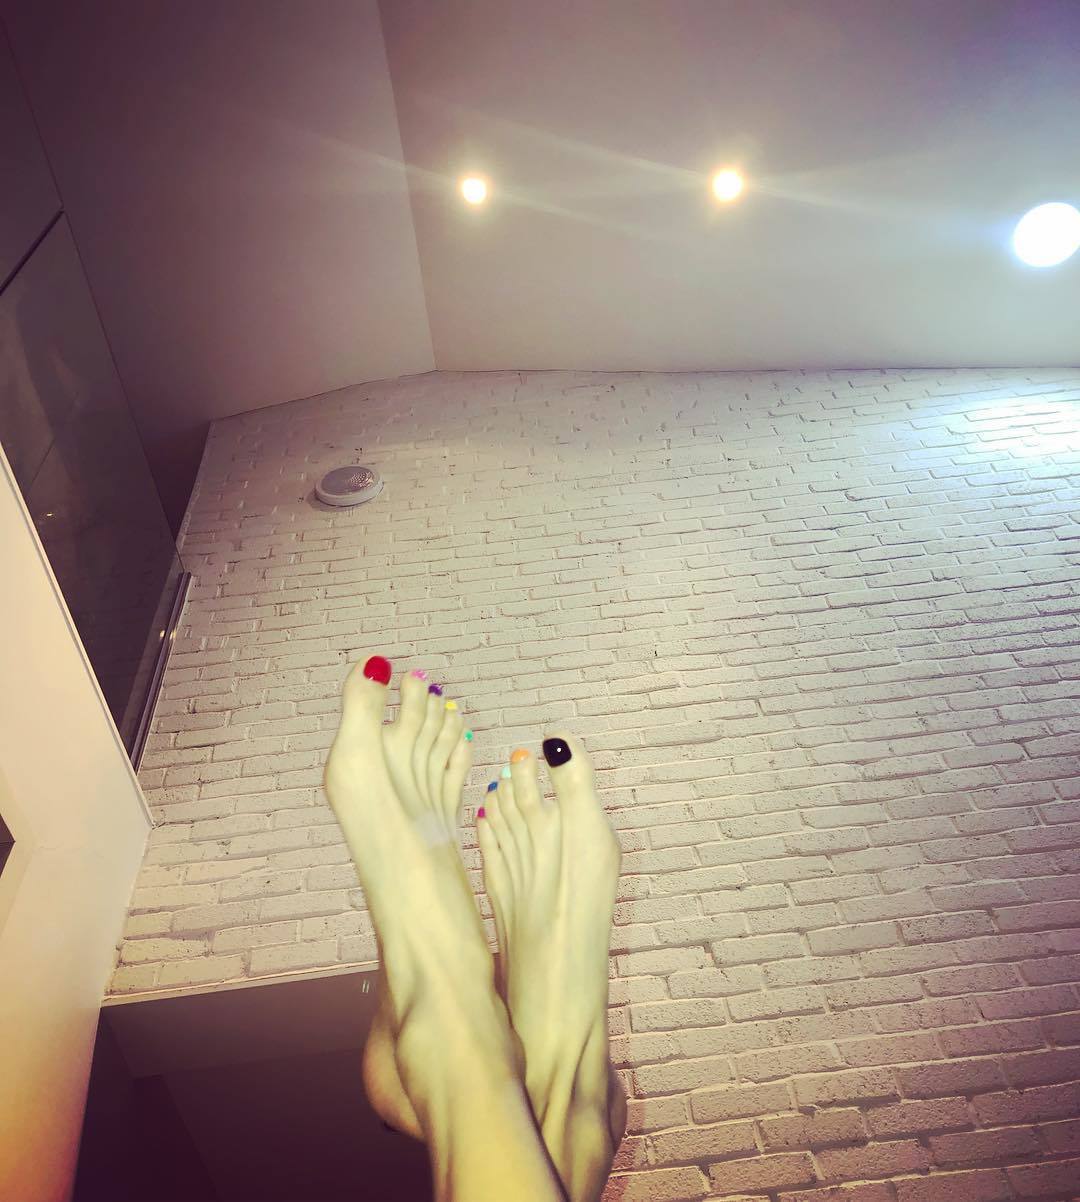 People who liked Hyuna's feet, also liked.